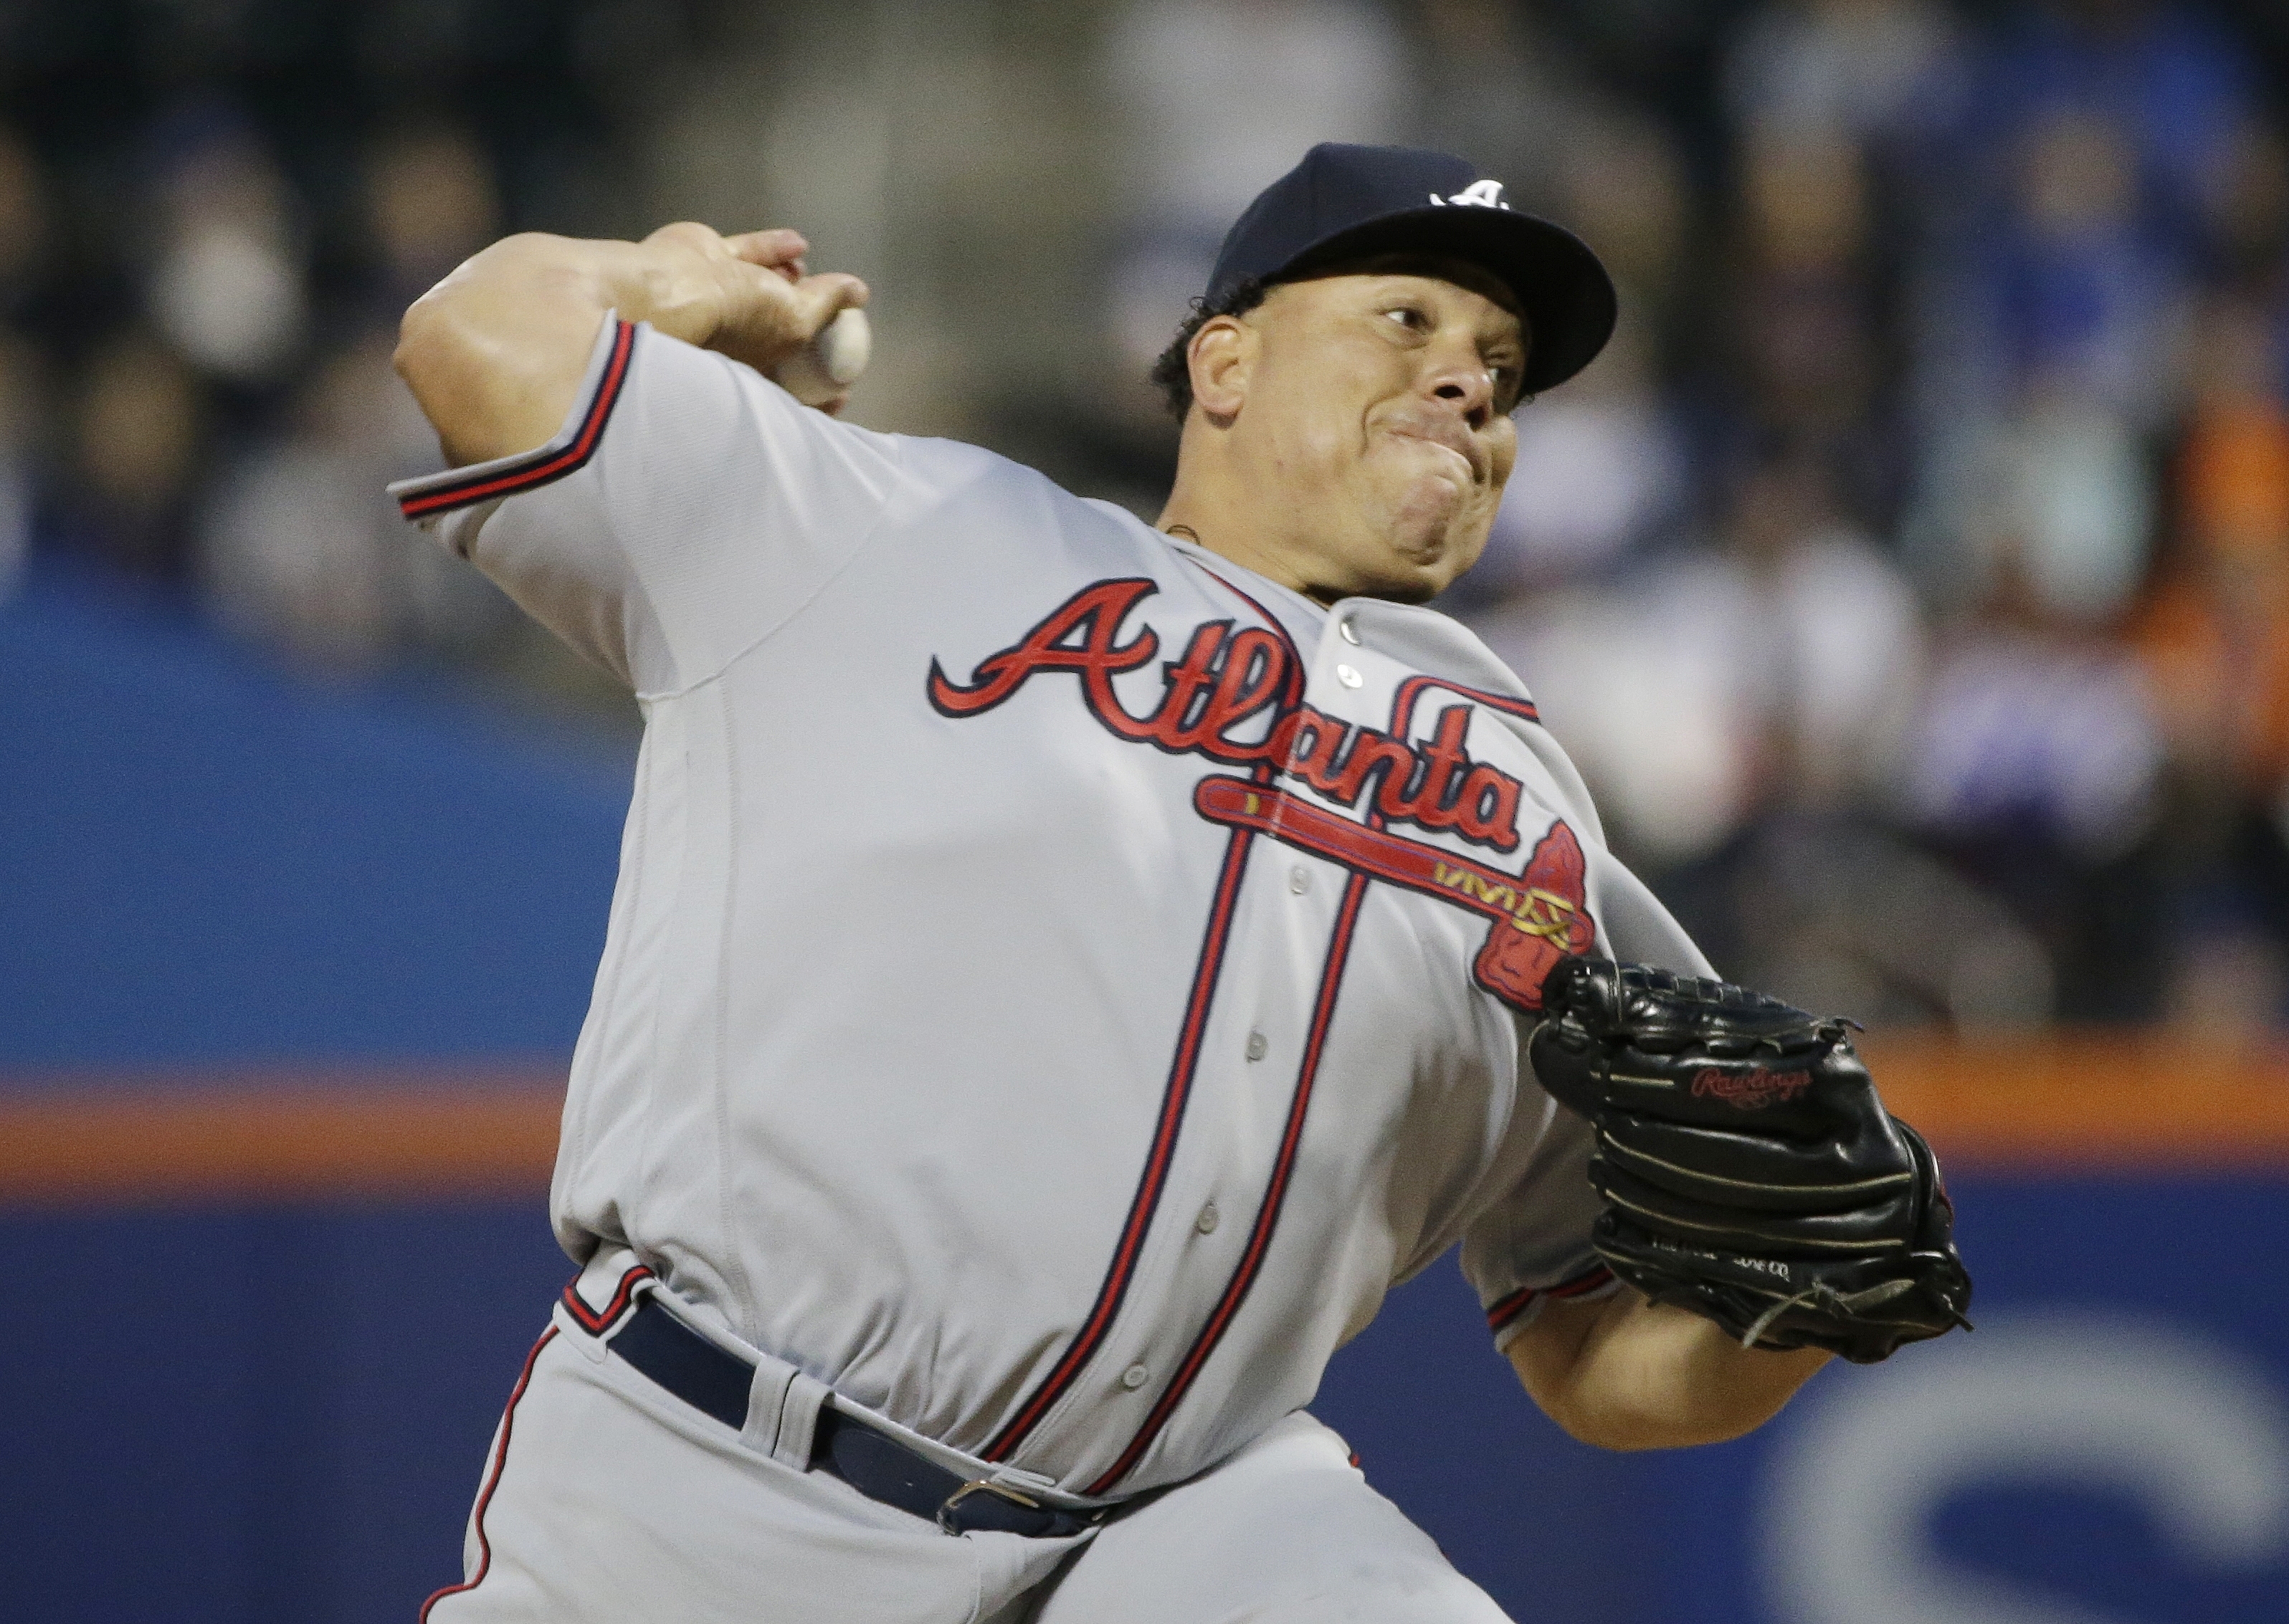 Bartolo Colon isn't Braves' only pitching problem, just the biggest